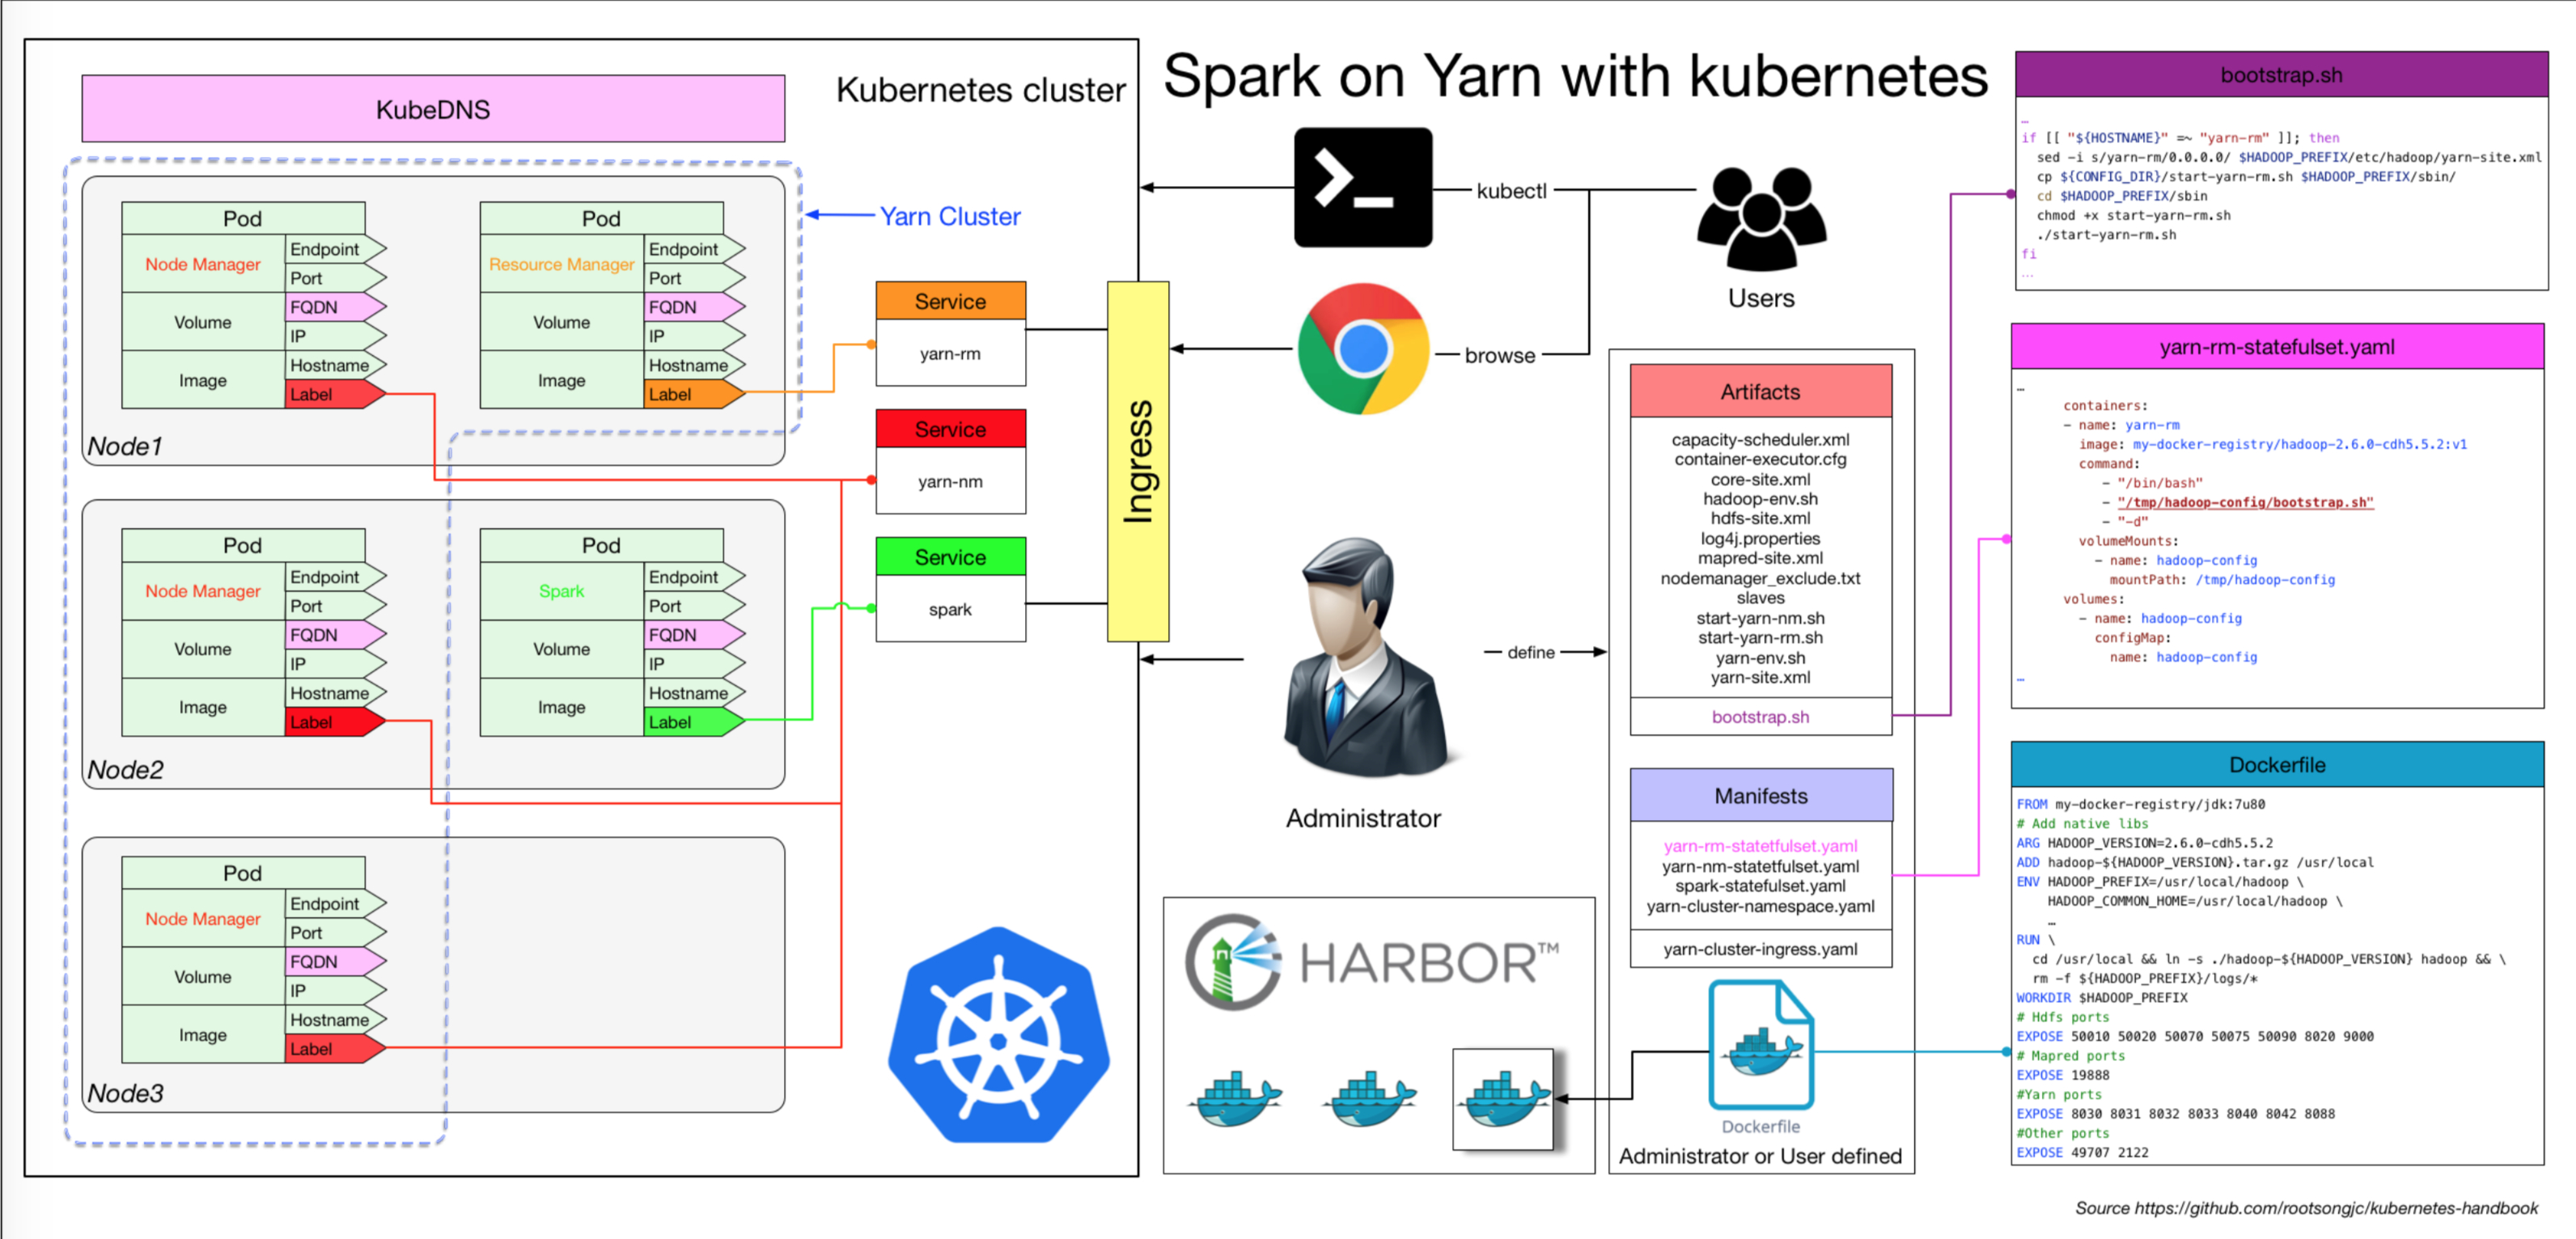 Spark on Yarn with Kubernetes